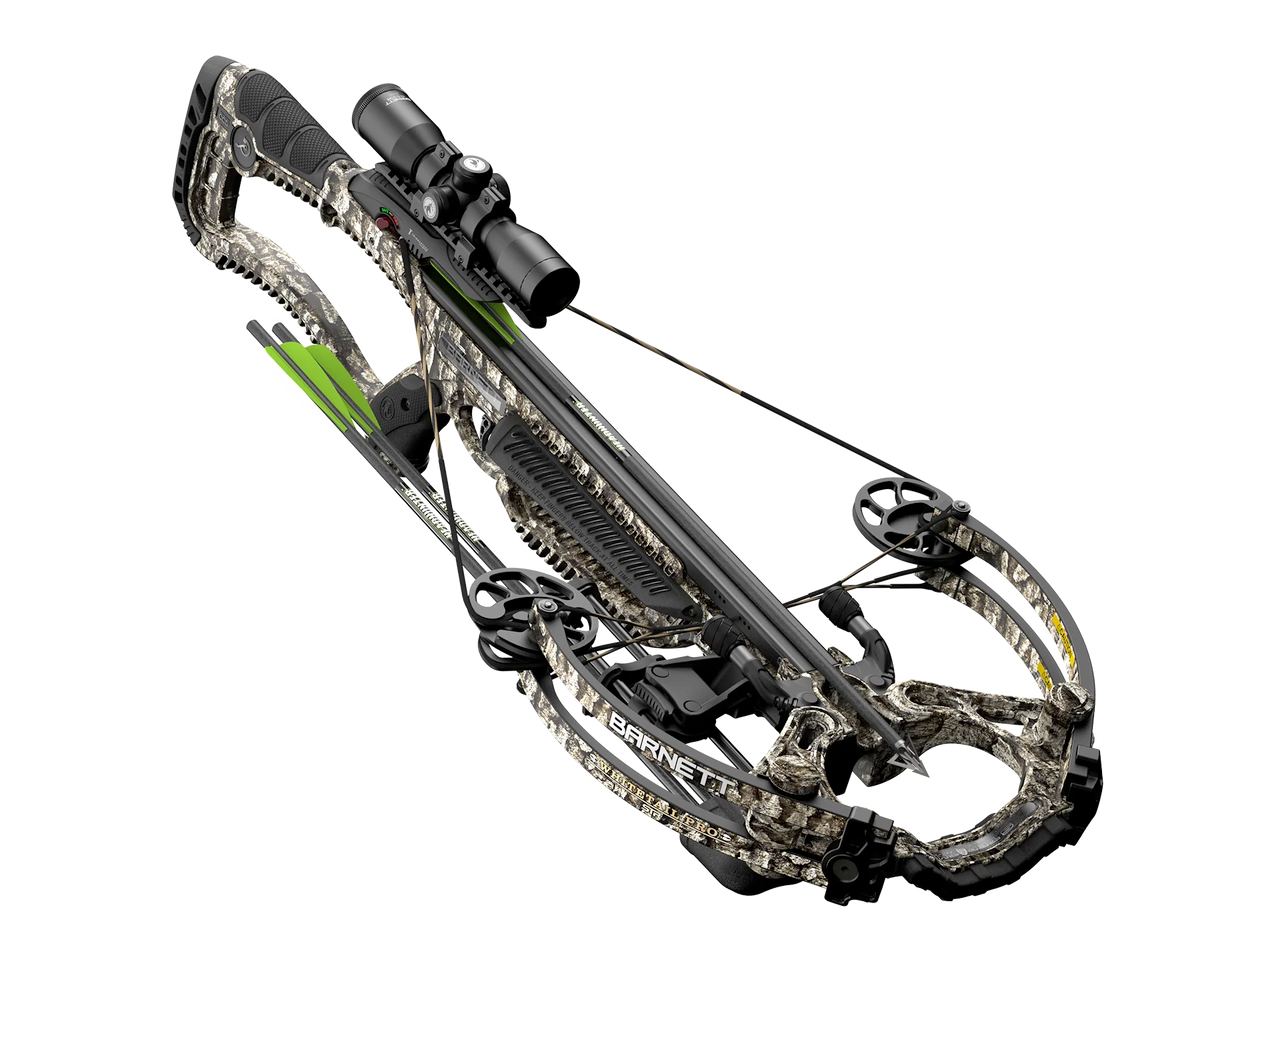 Barnett Whitetail Pro STR Crossbow Kit, w/ 4x32mm Illuminated Scope, Side-Mount Quiver, Arrows, Wax, Rope Cocking Device